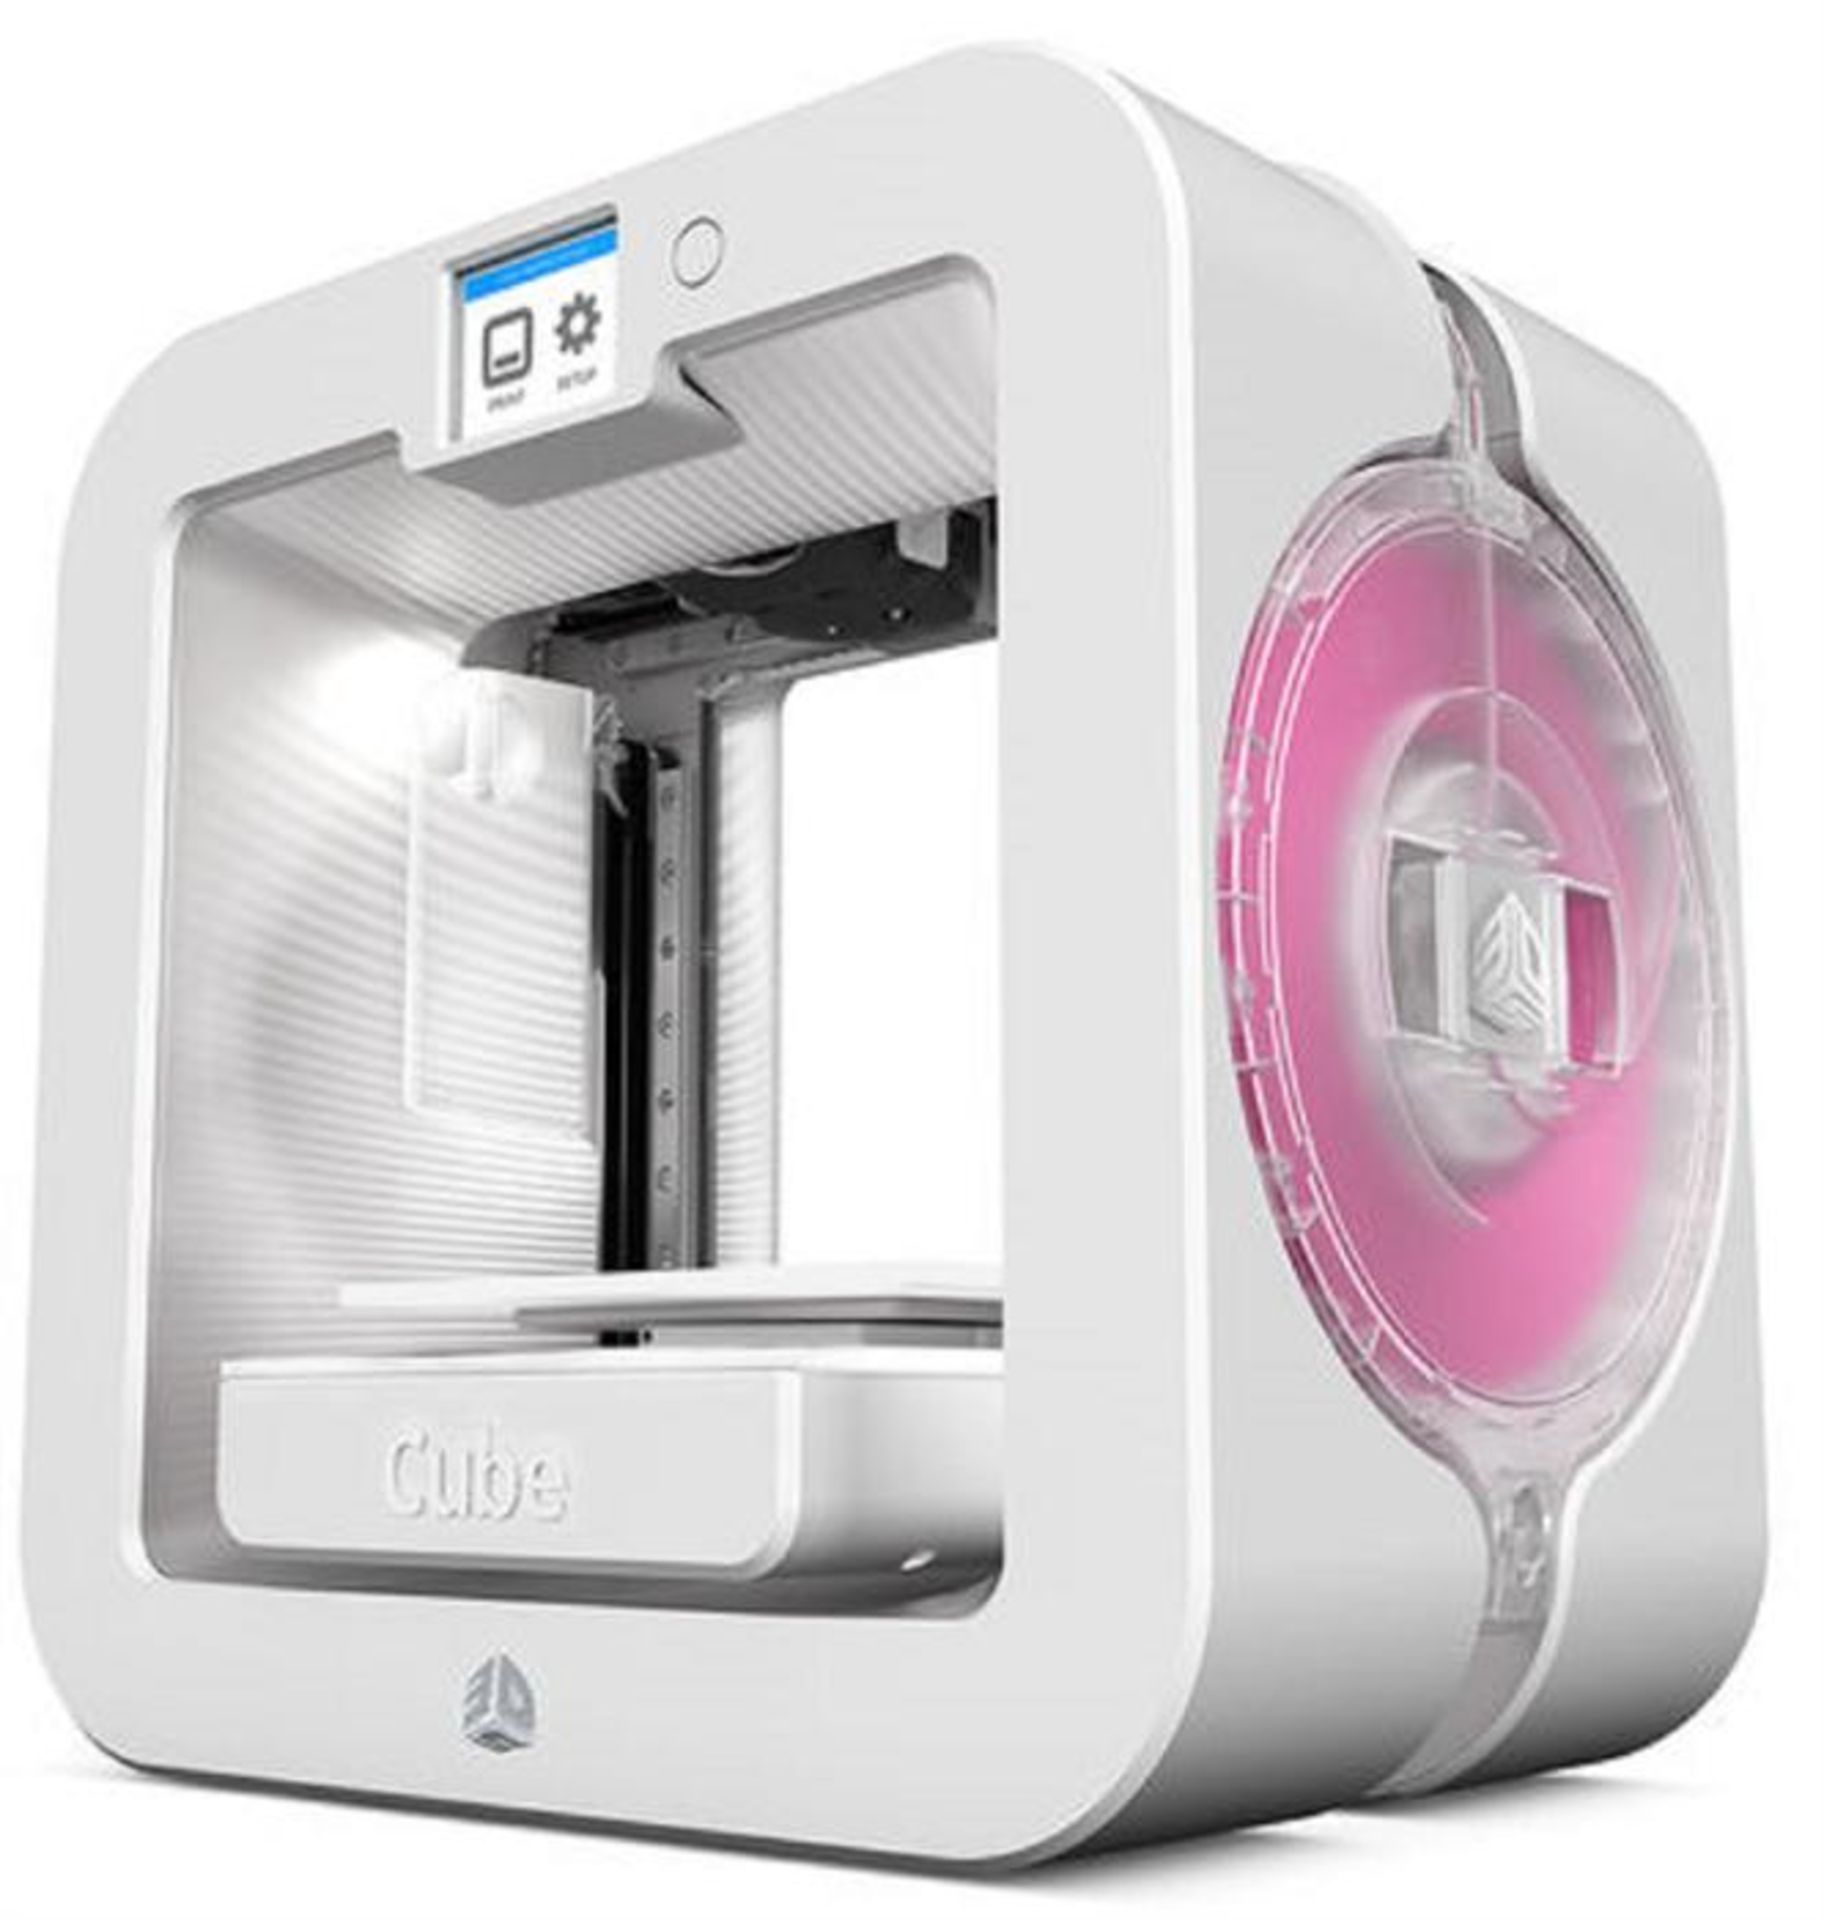 NEW & BOXED 3D Systems 3rd Gen Cube 3D Printer